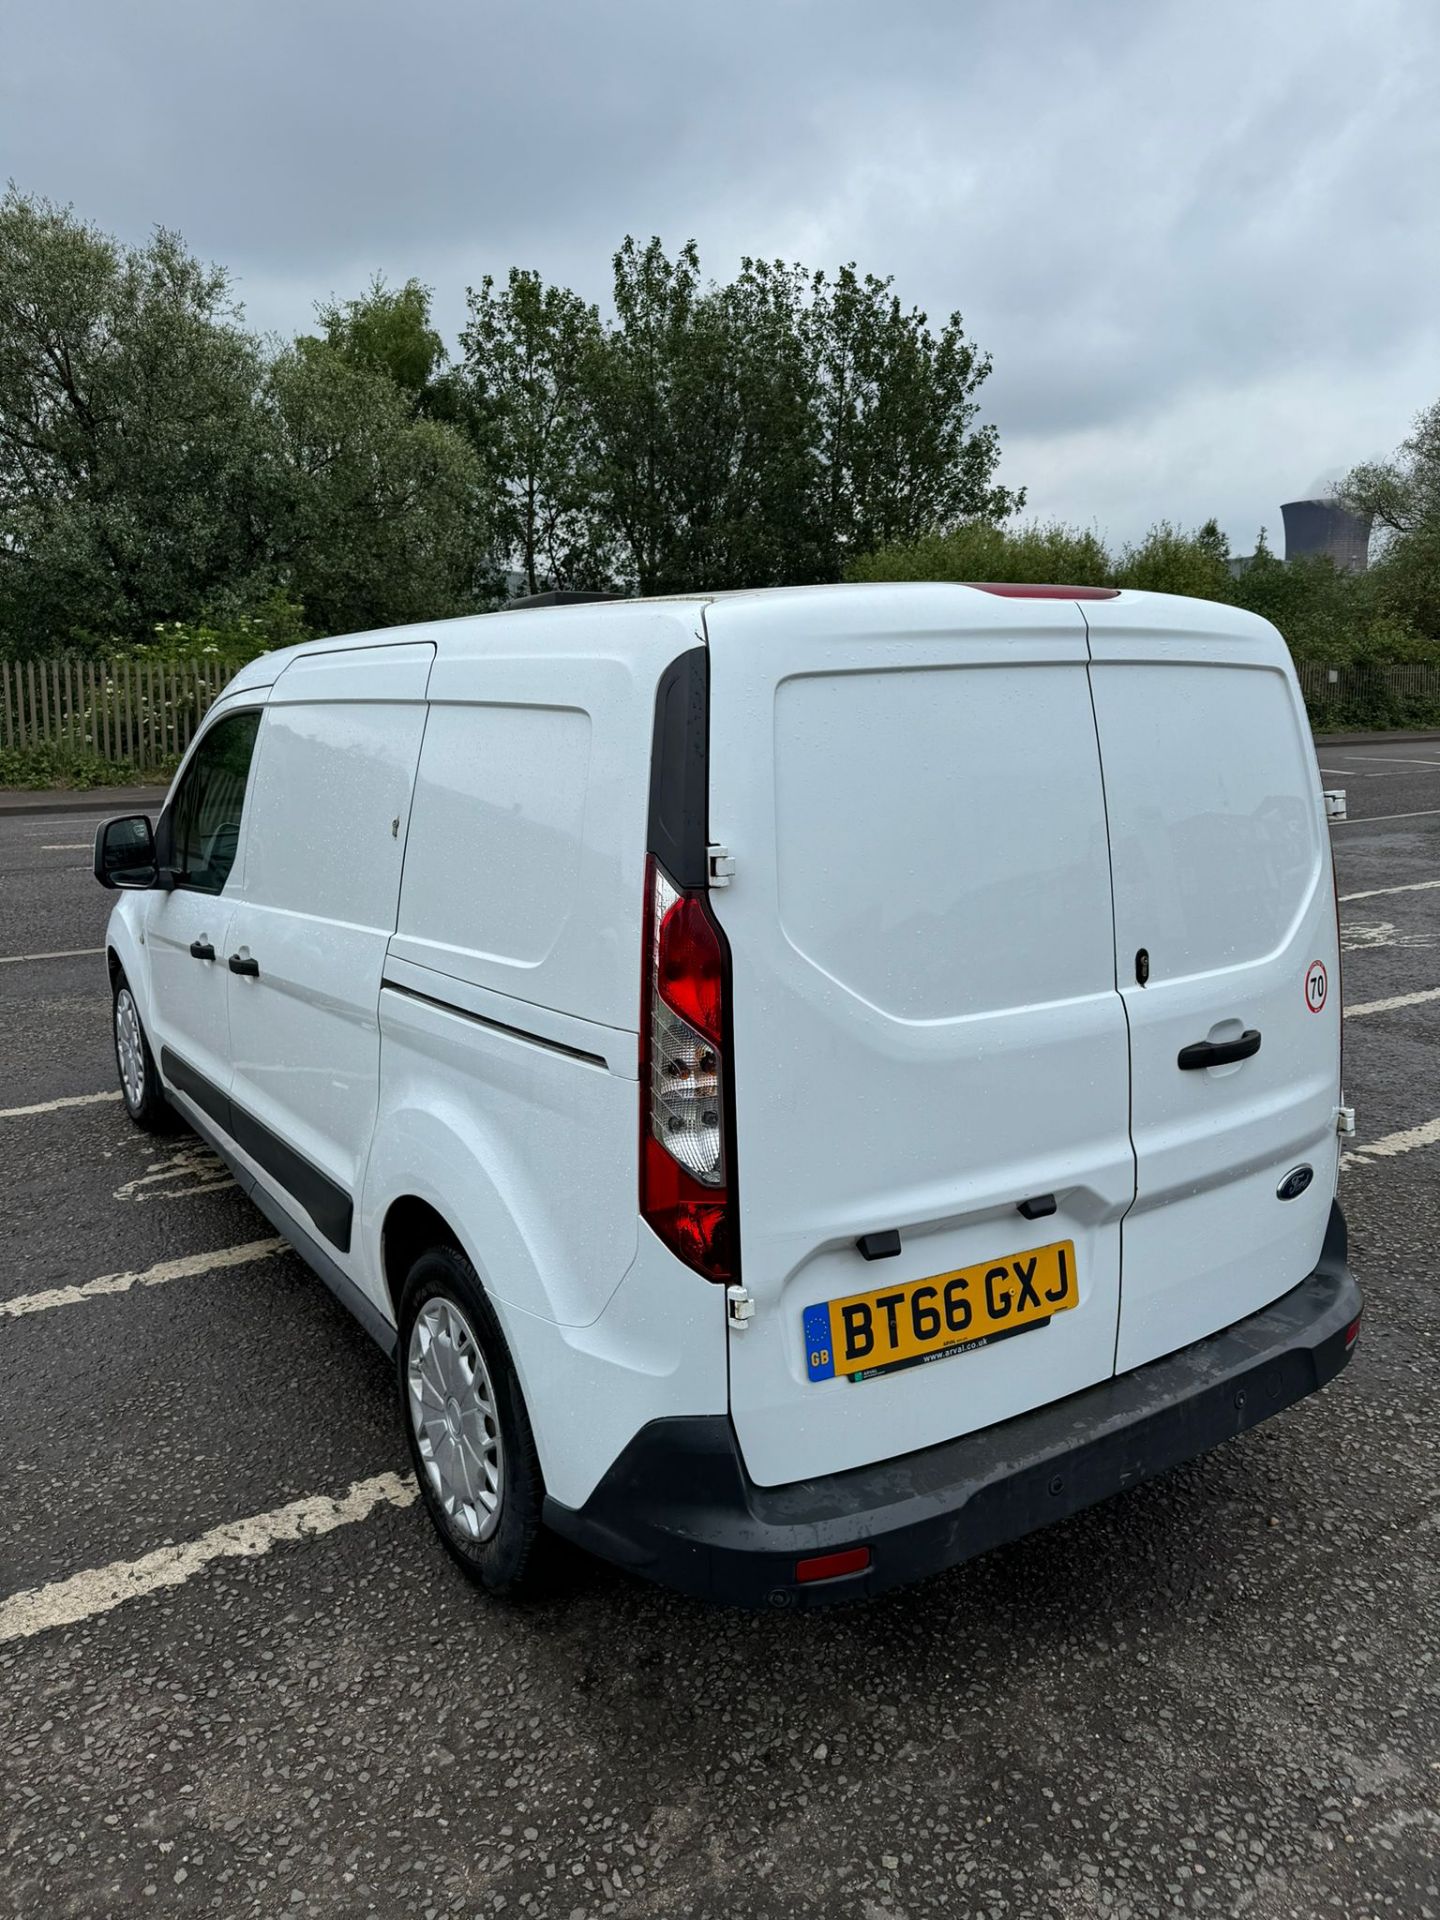 2016 66 FORD TRANSIT CONNECT LWB PANEL VAN - 123K MILES - AIR CON - Image 4 of 12